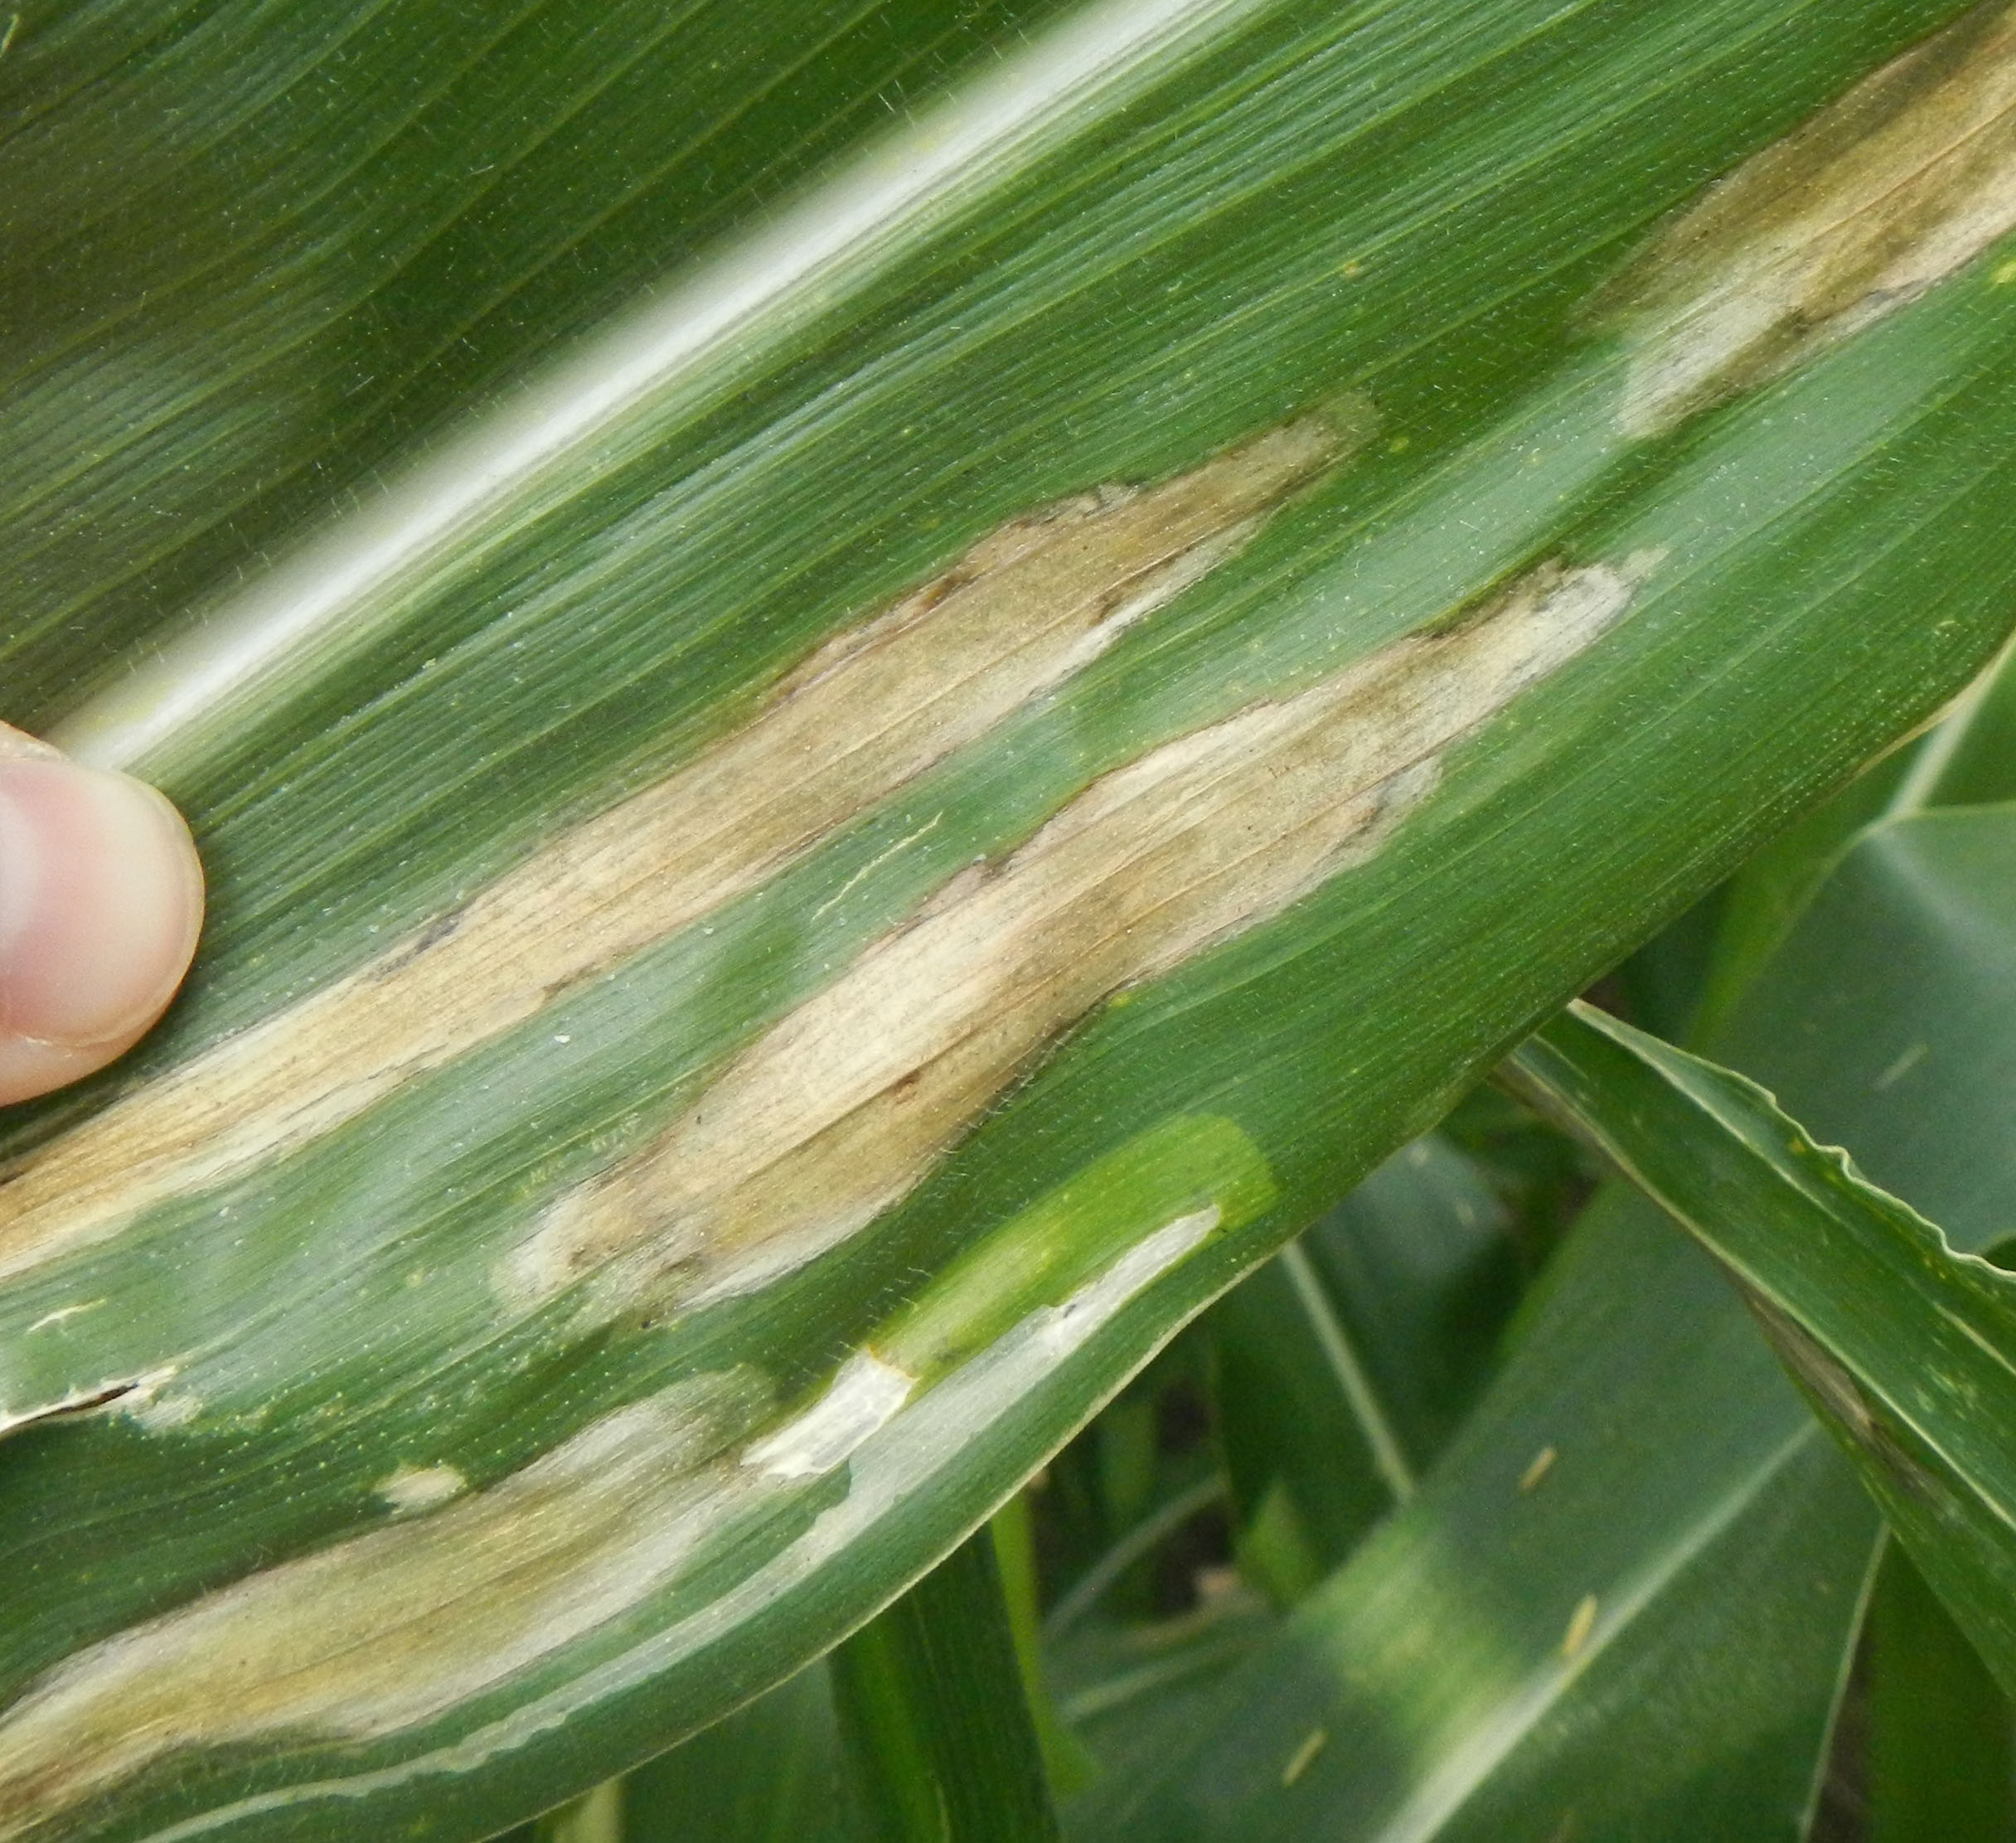 Figure 2. Northern corn leaf blight lesions are long, tan, and cigar-shaped.